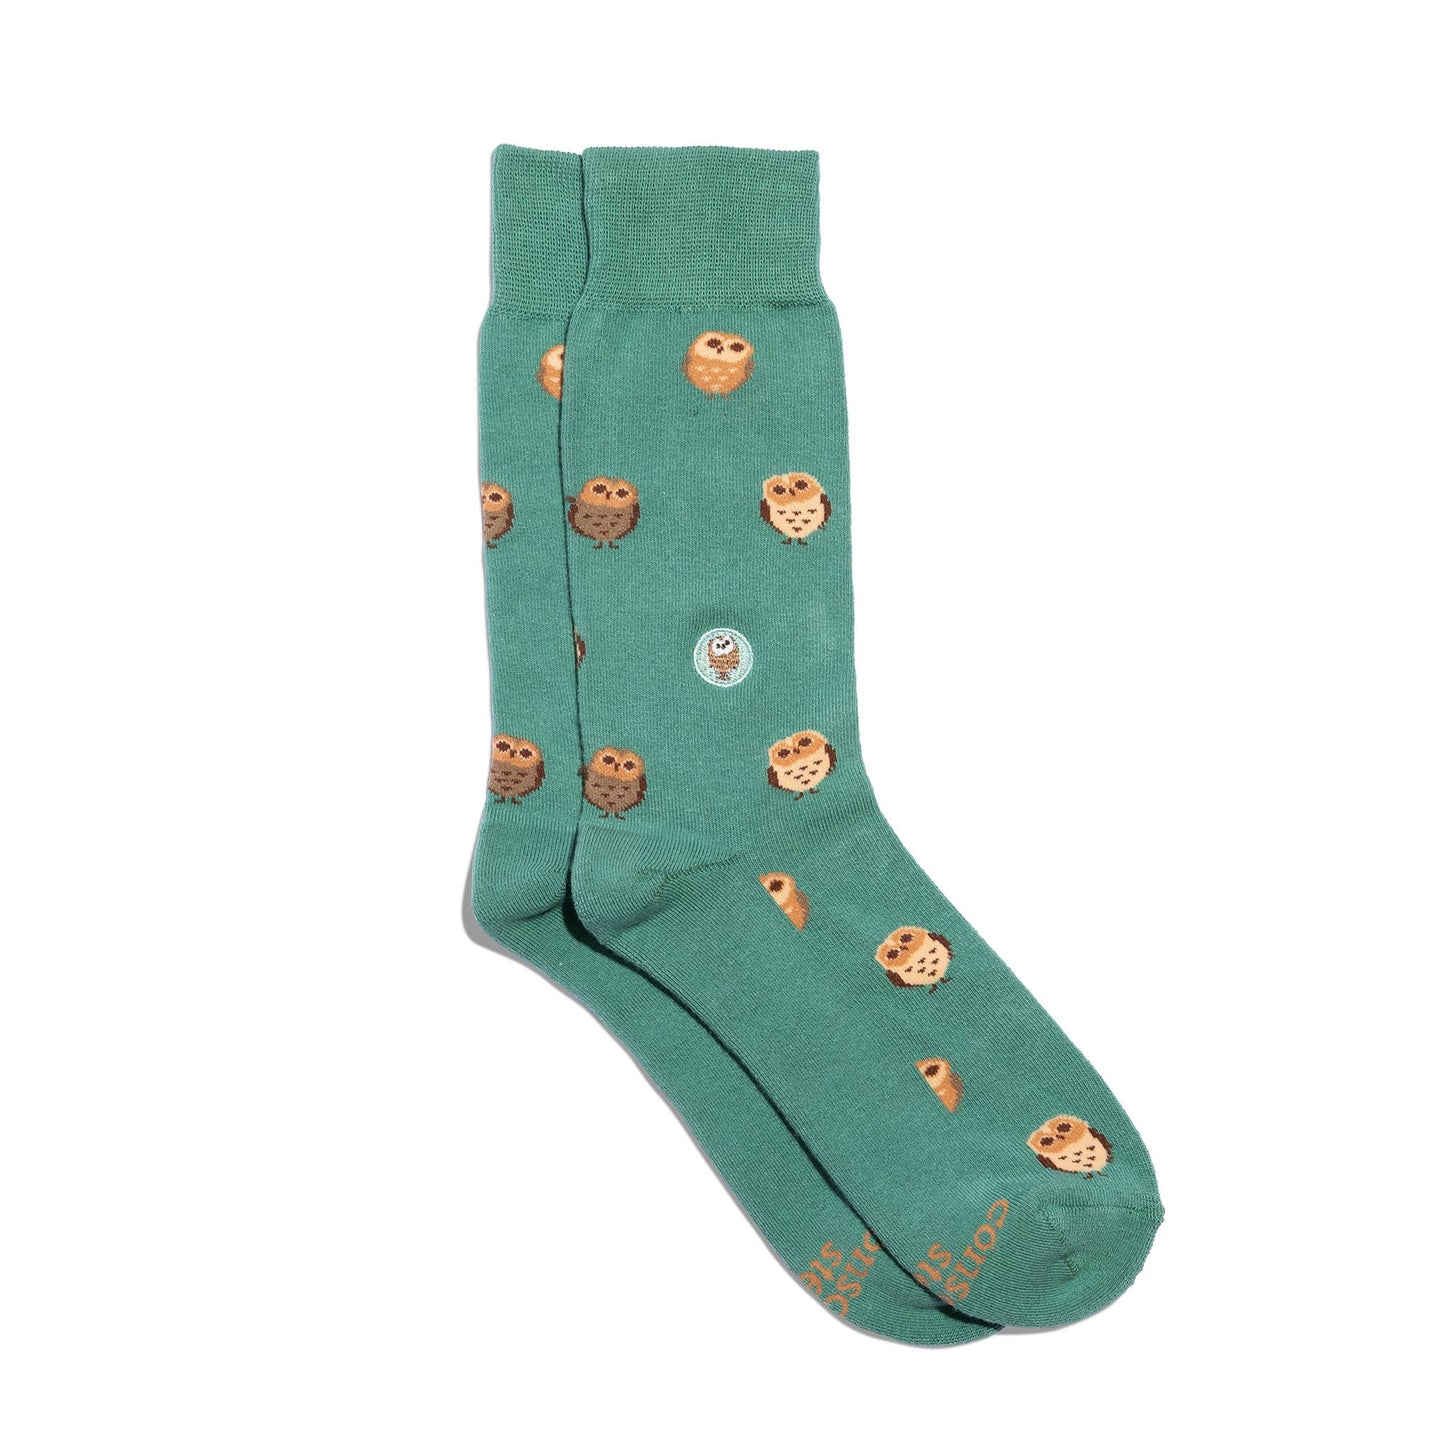 Conscious Step - Socks that Protect Owls